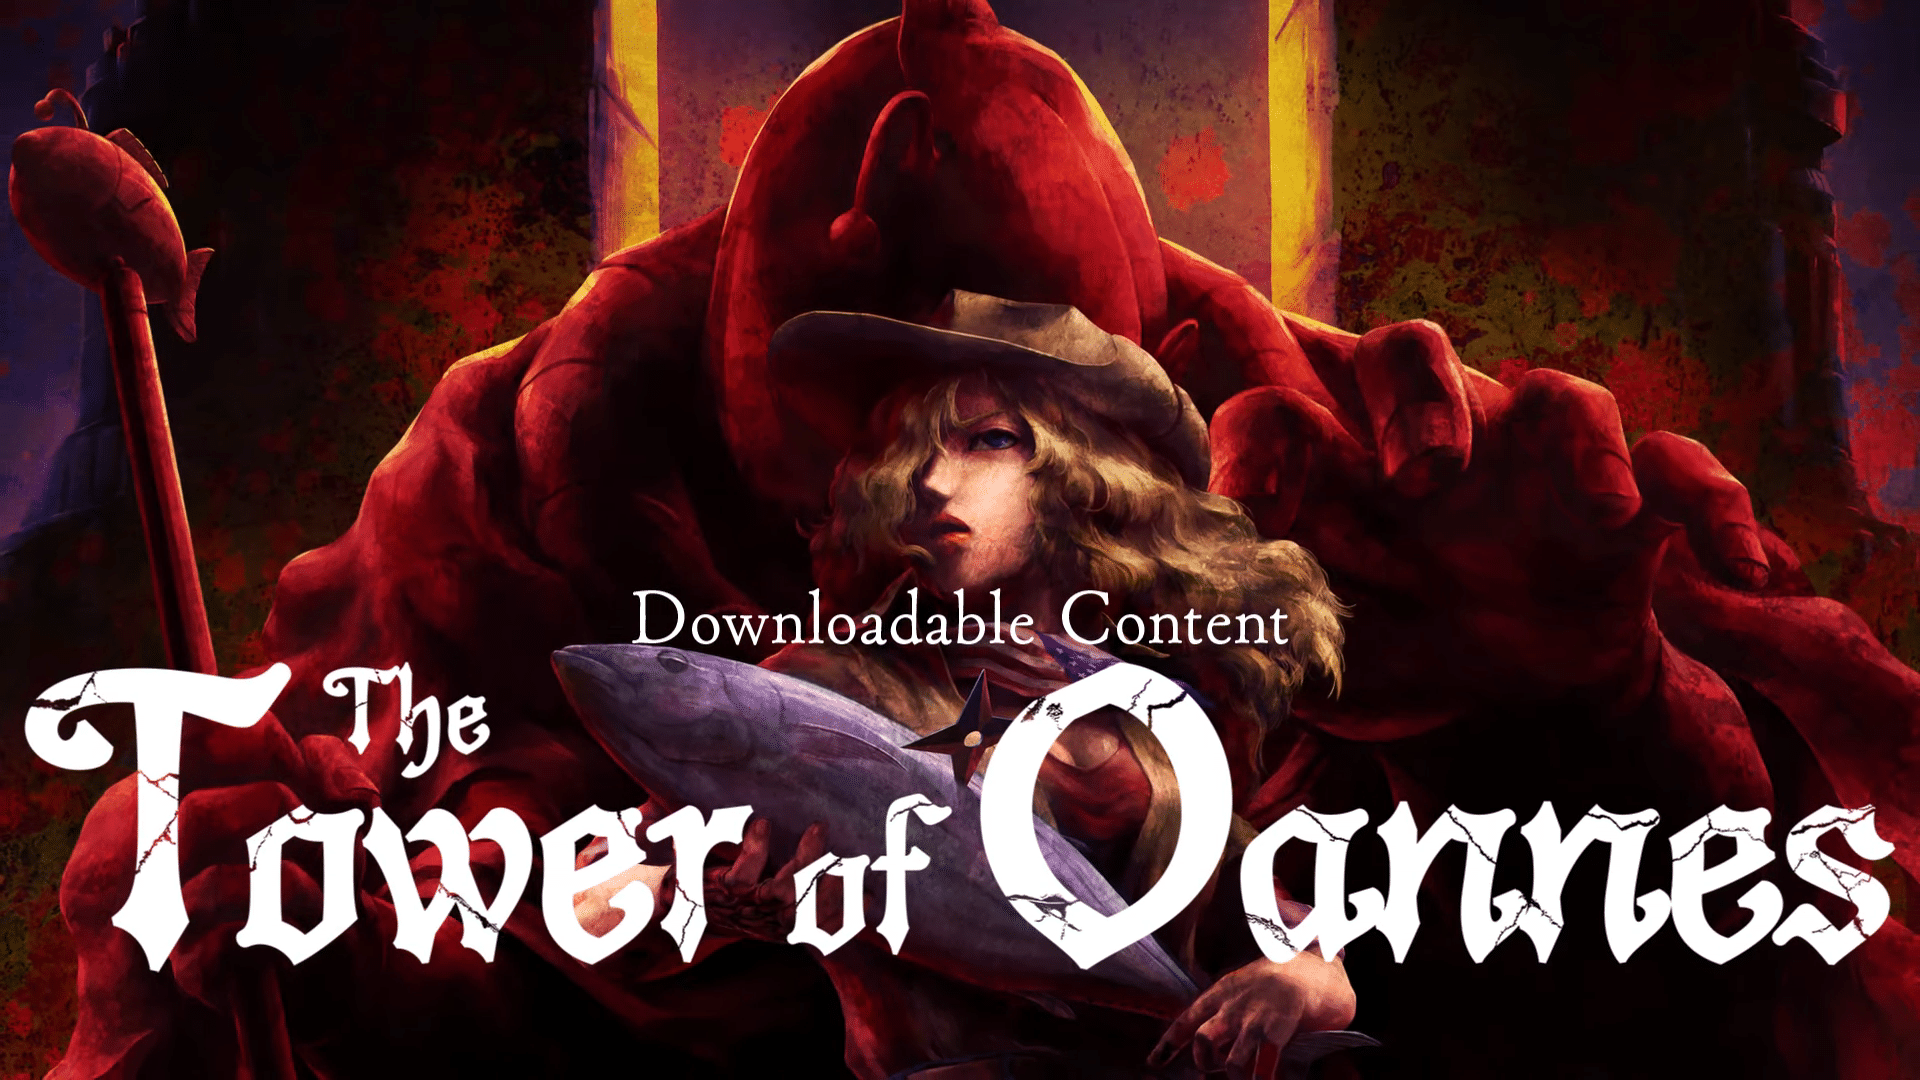 La-Mulana 2: The Tower of Oannes DLC Now Available On PC; New Trailer